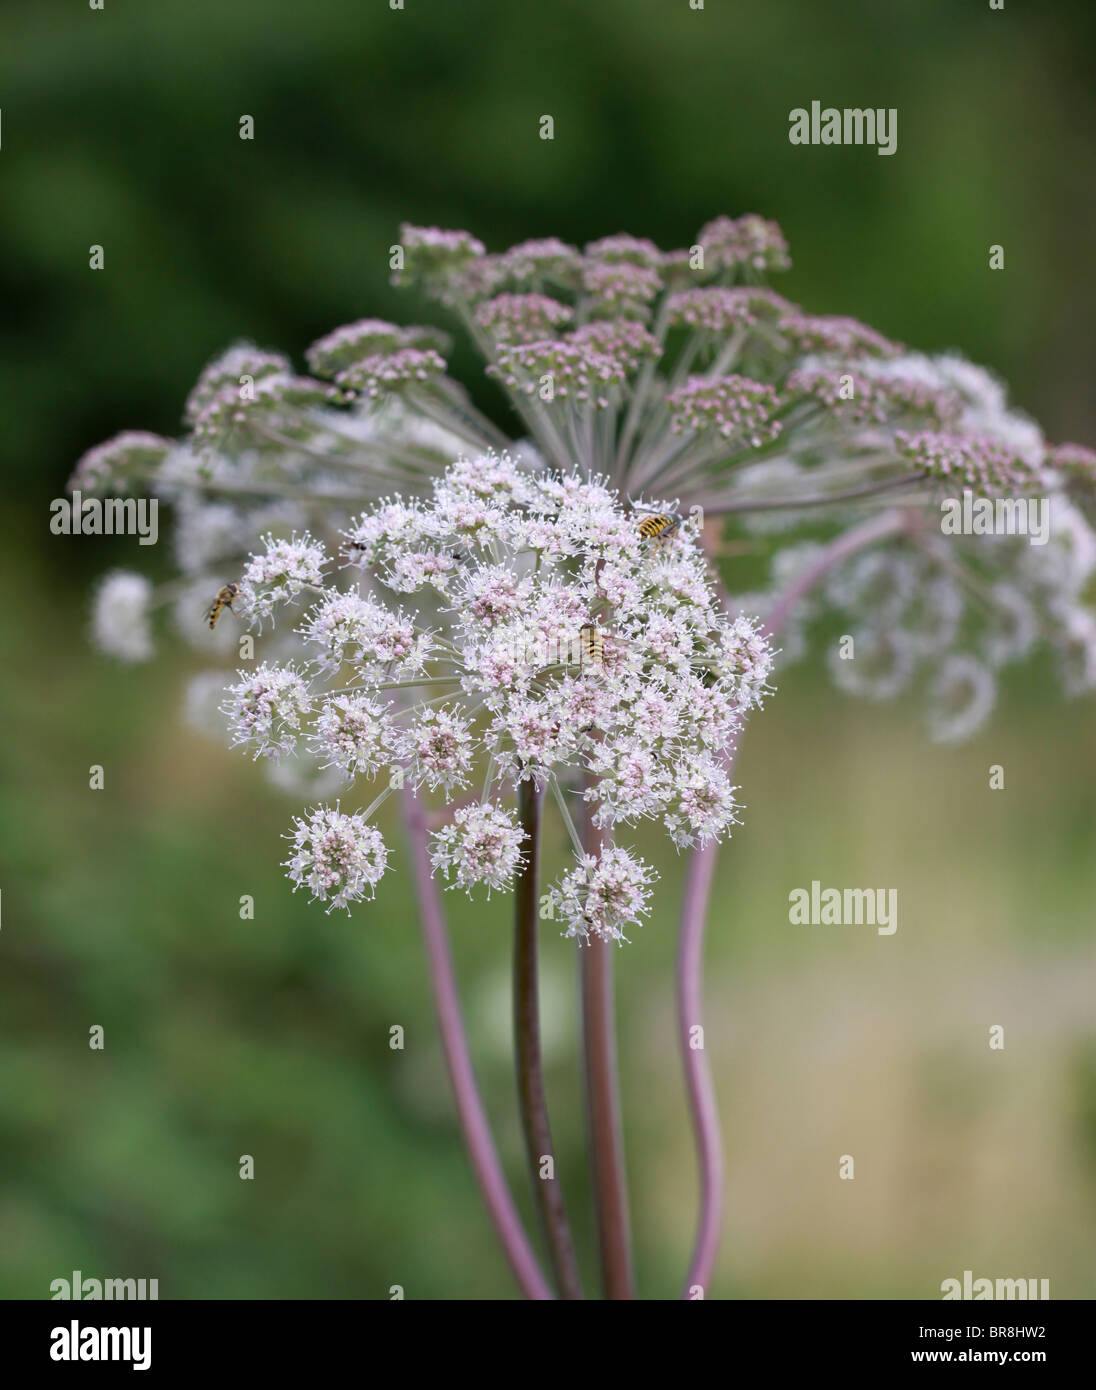 Flowers of hogweed or cow parsnip Stock Photo